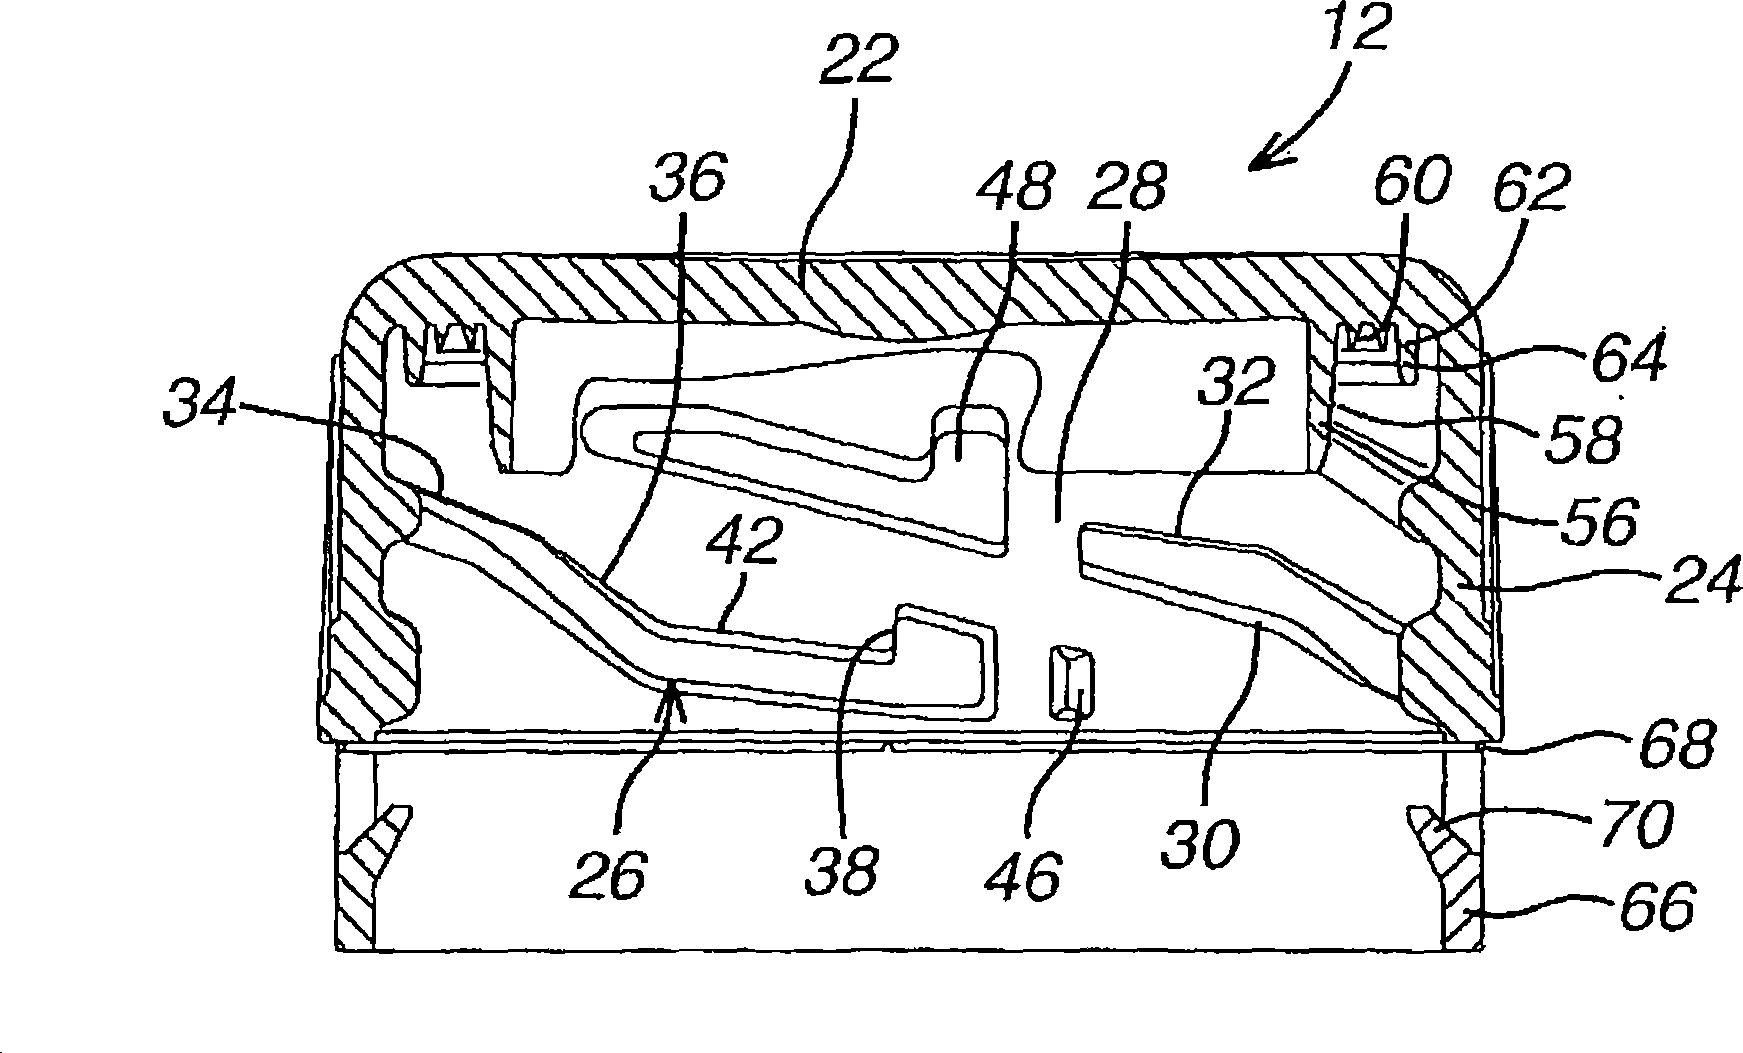 Bottle and closure assembly with locking elements